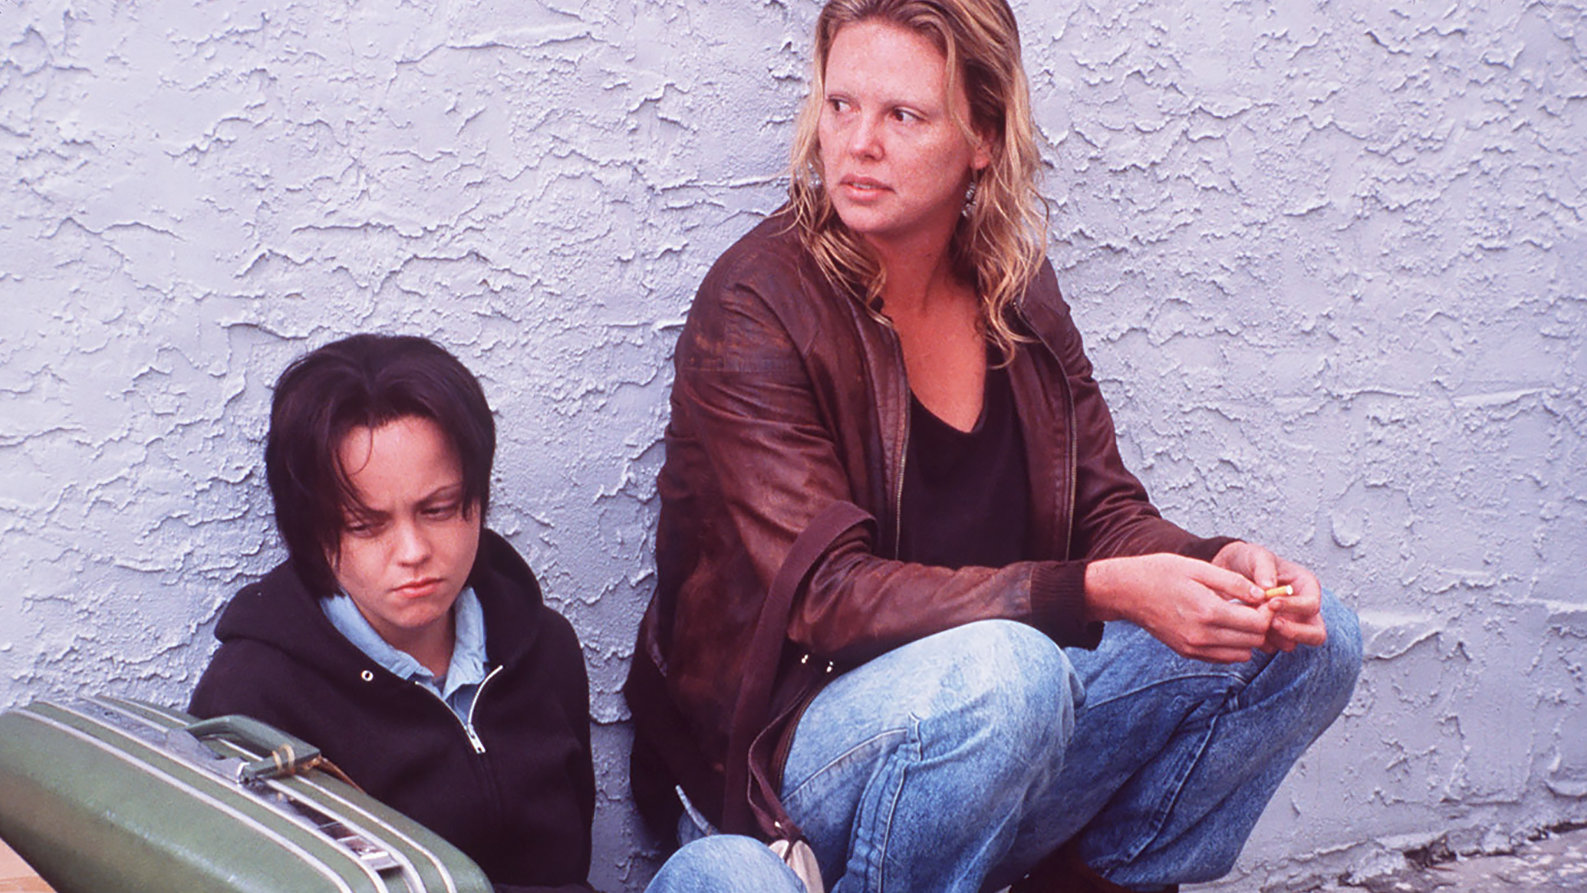 21 Lesbian And Bisexual Movies Based On A True Story Ranked Autostraddle 3960